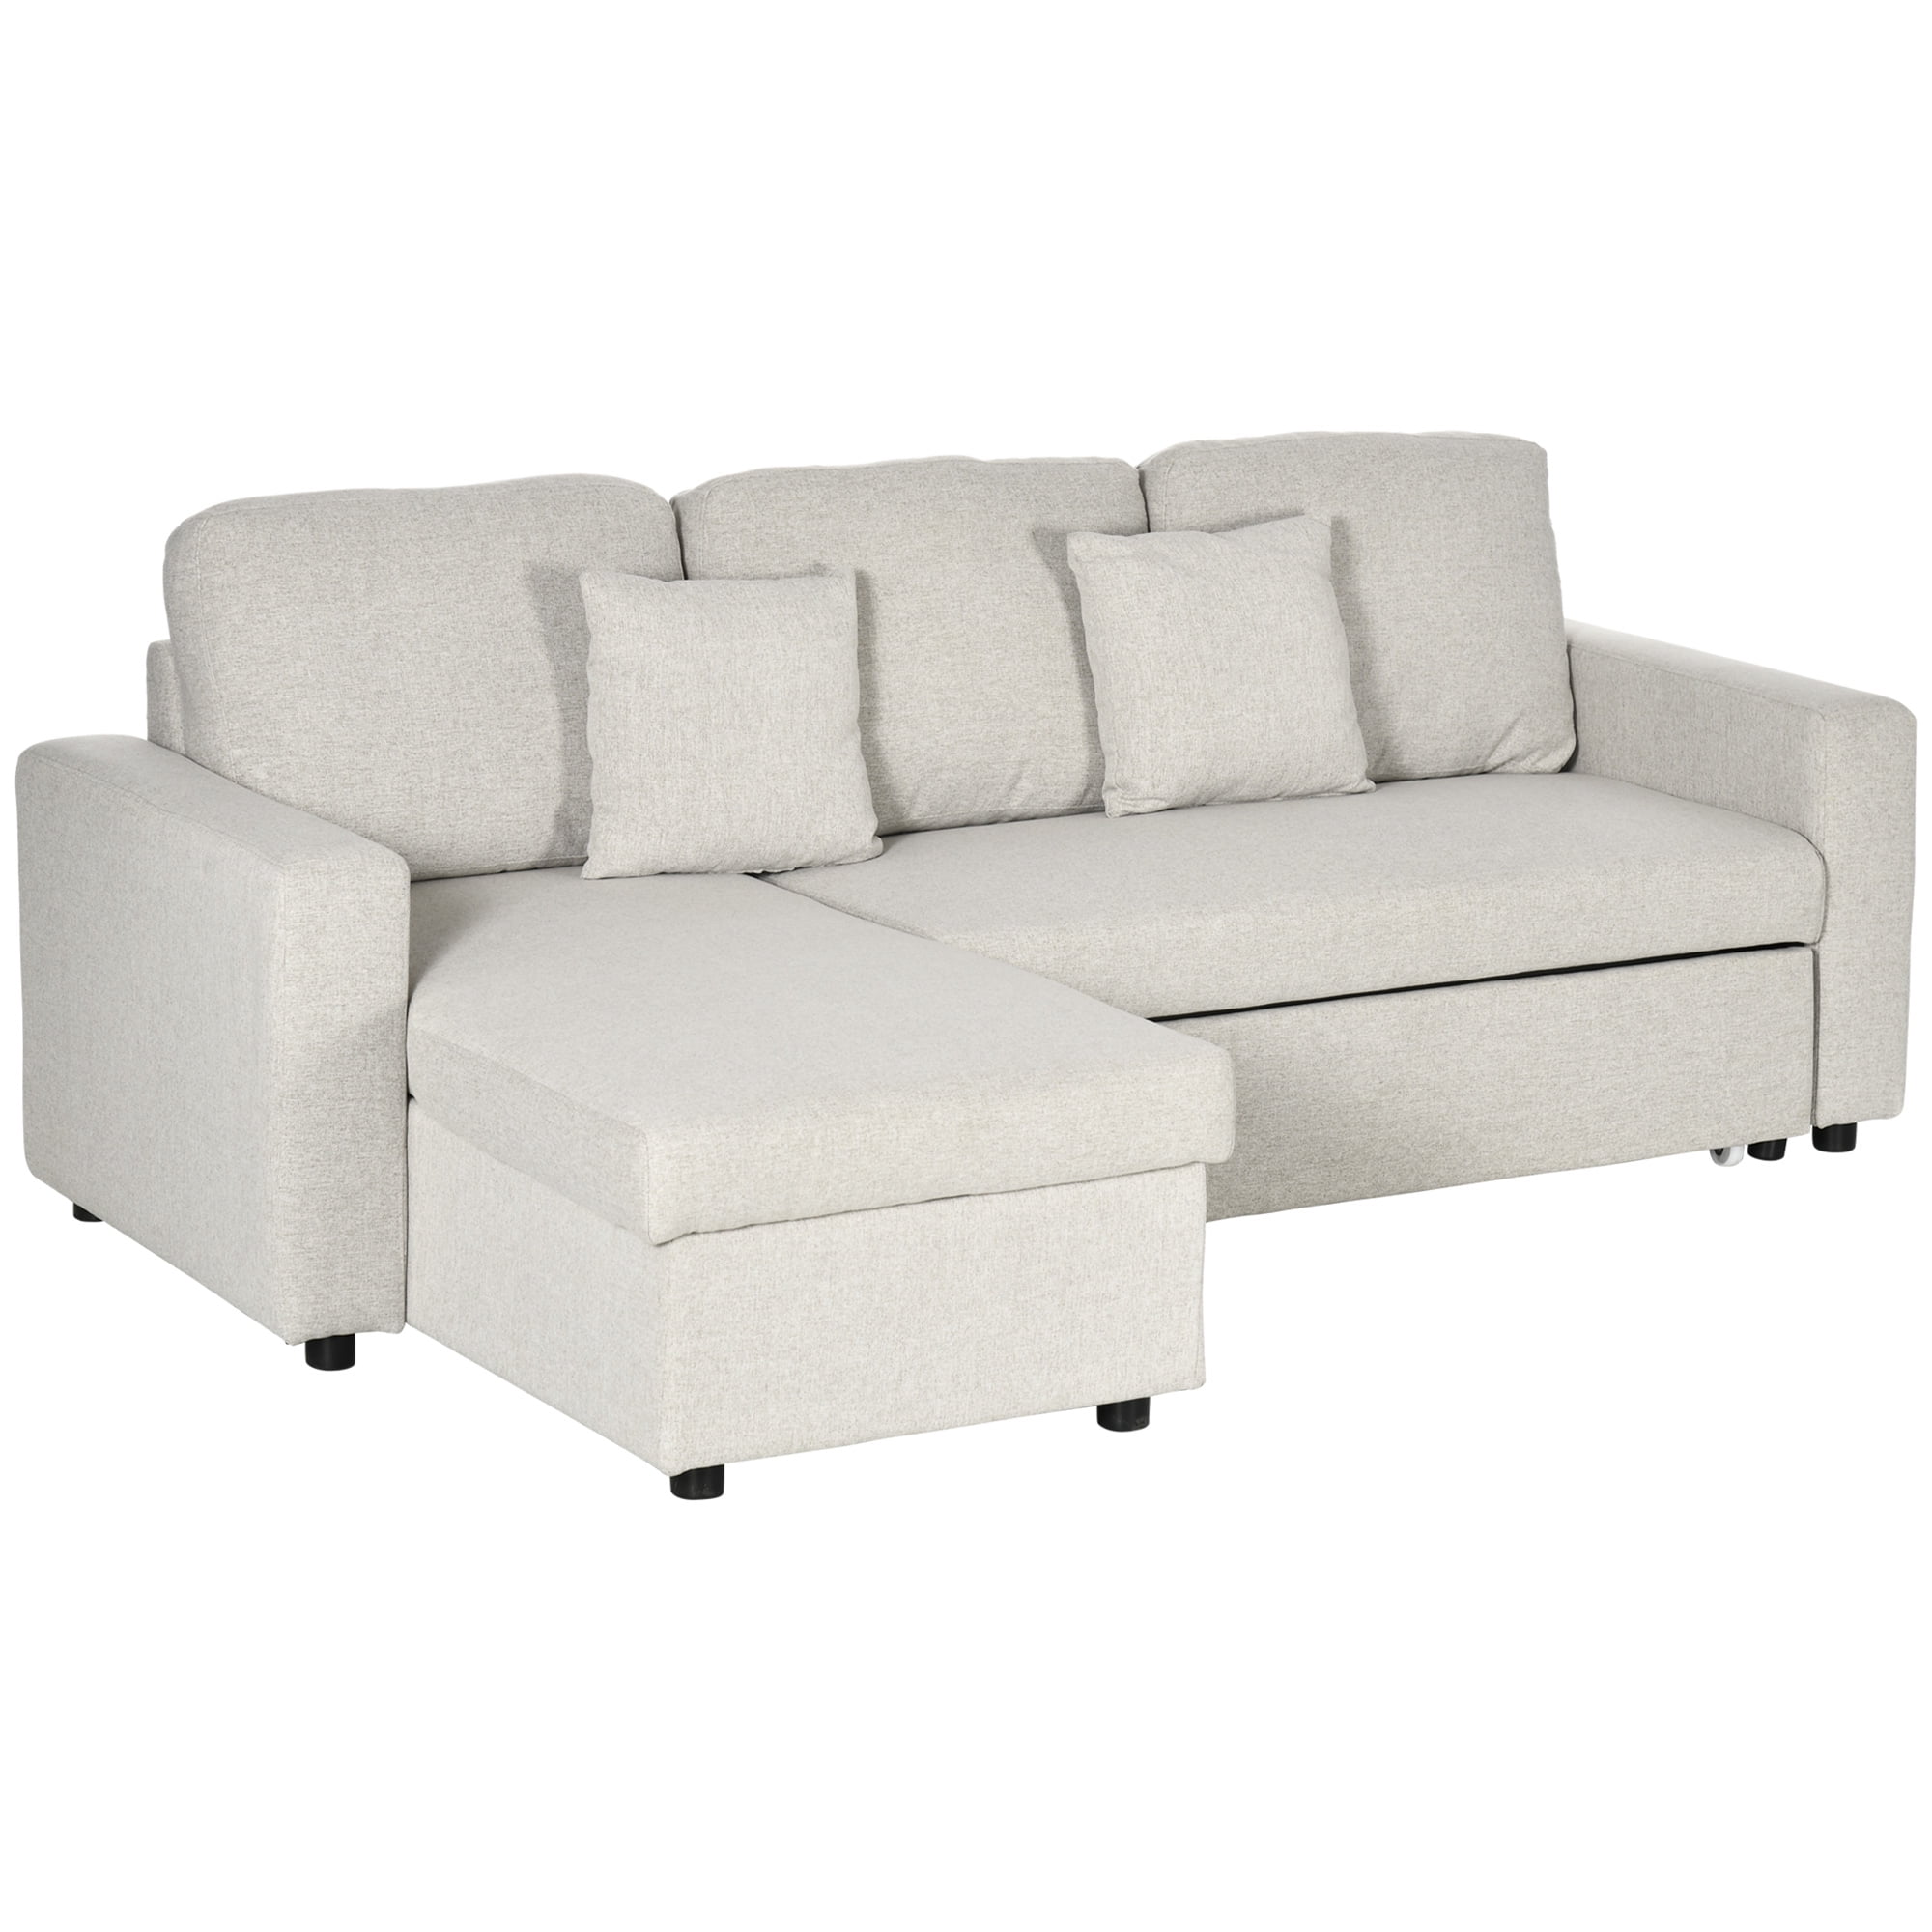 bruser Tænk fremad Mount Vesuv HOMCOM Sectional Sleeper Sofa, Linen Fabric L Shaped Couch with Pull out Bed,  Reversible Storage Chaise for Living Room, Apartment, 3-seat, Cream White -  Walmart.com